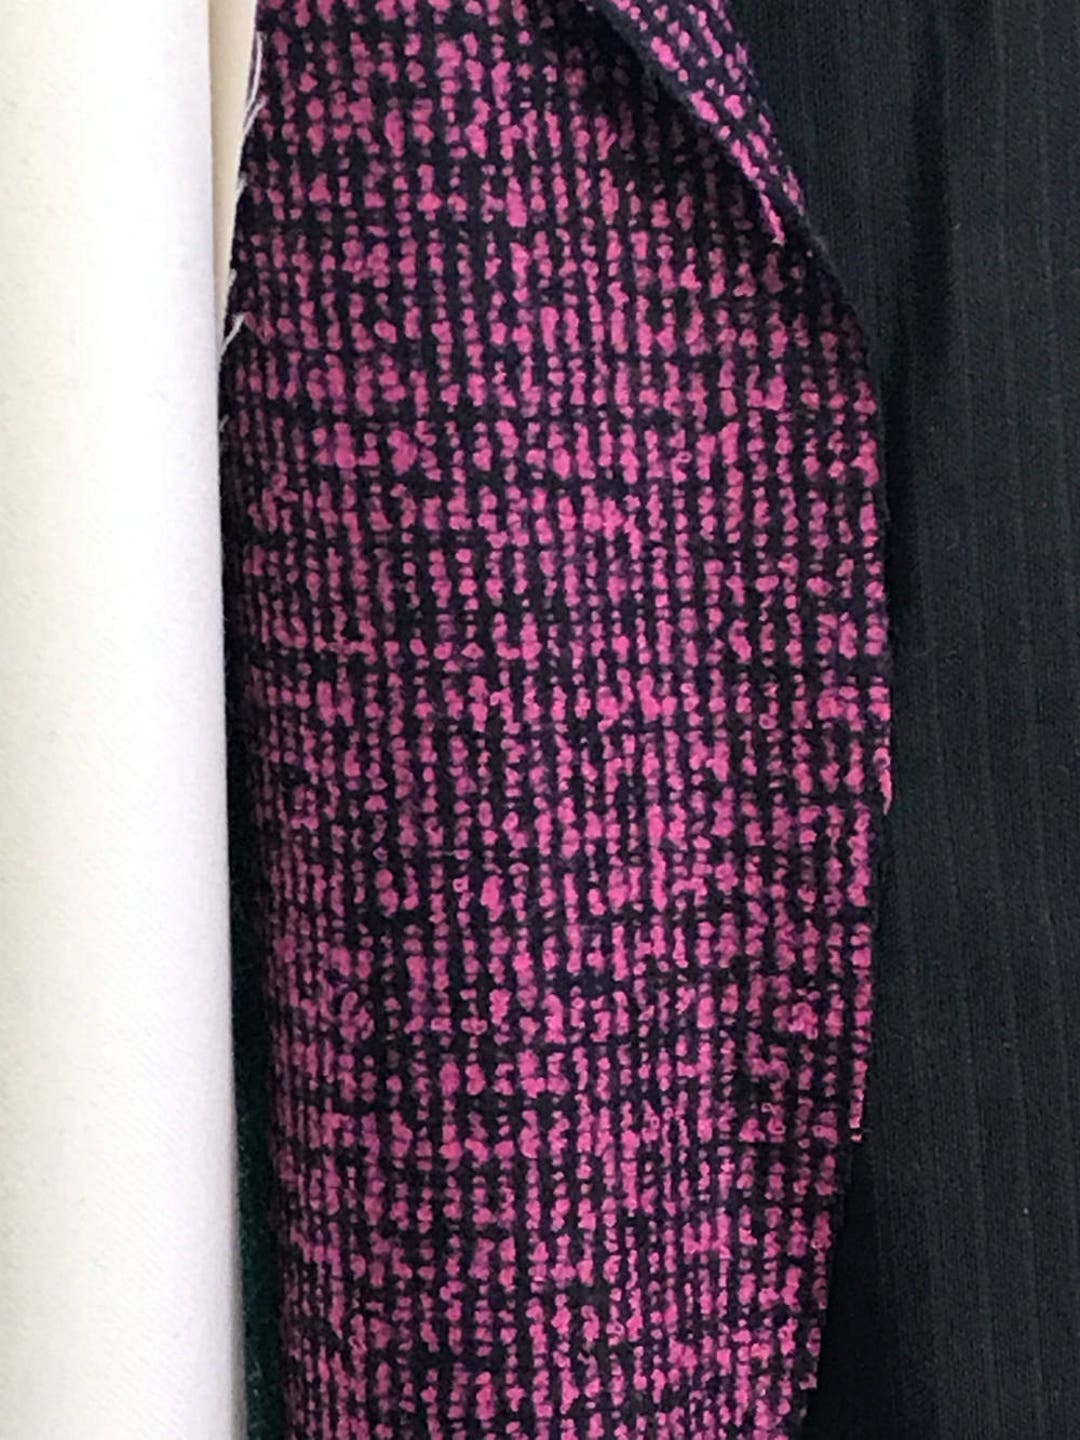 Pink on Black Boucle Tweed Fancy Wool Winter Fabric, Fuchsia on Black,  Suiting Skirt Coat Fabric -  Canada